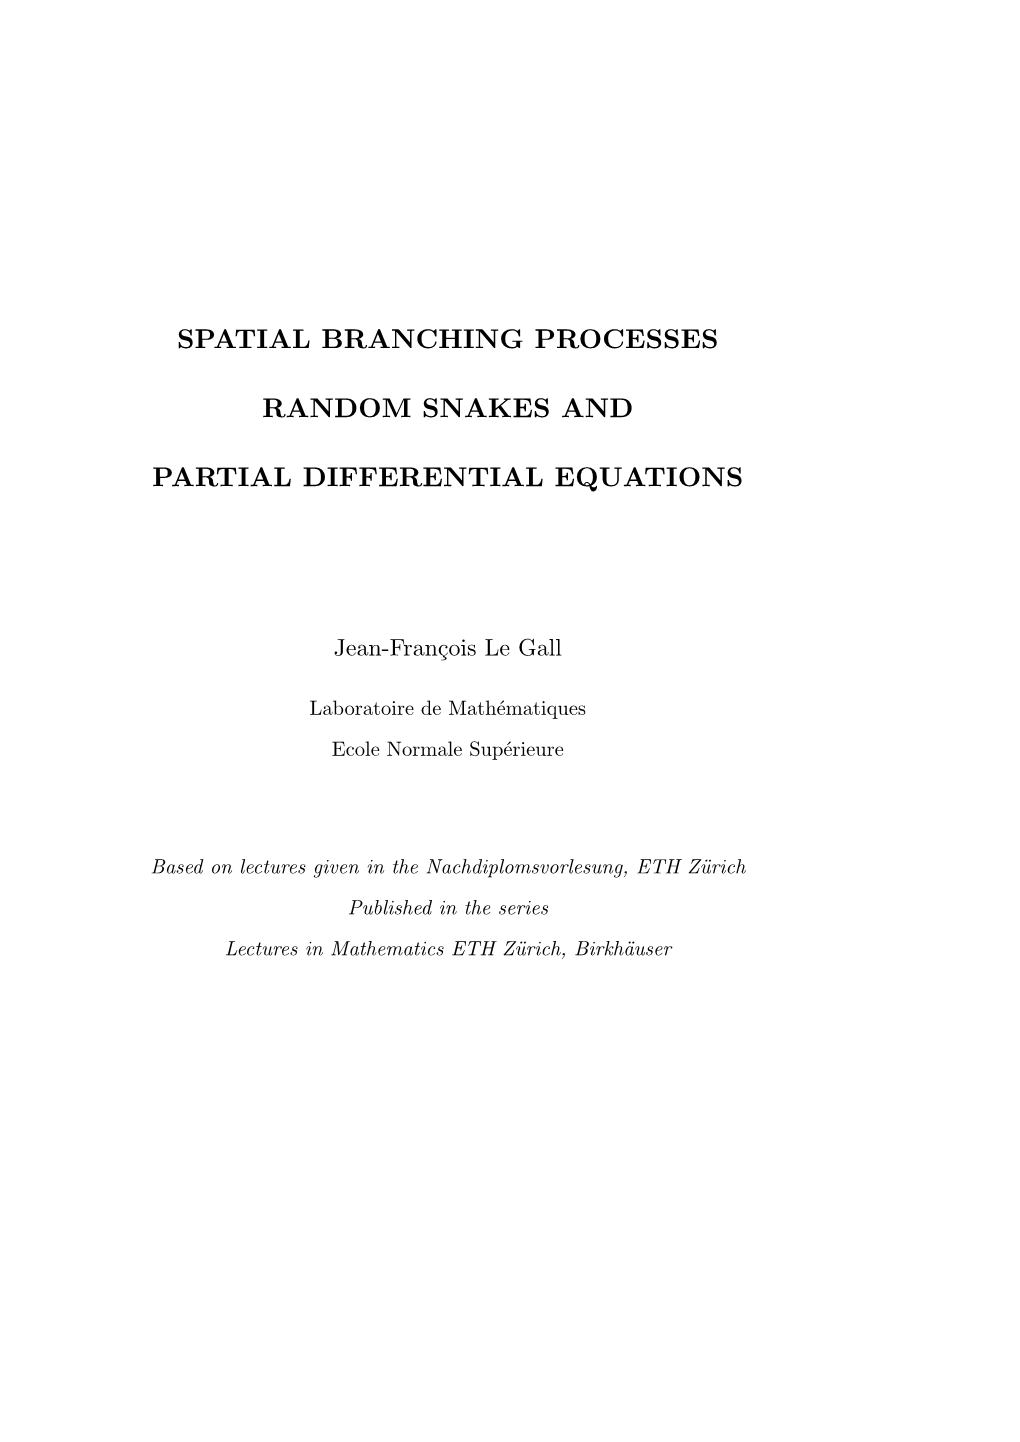 Spatial Branching Processes Random Snakes and Partial Differential Equations